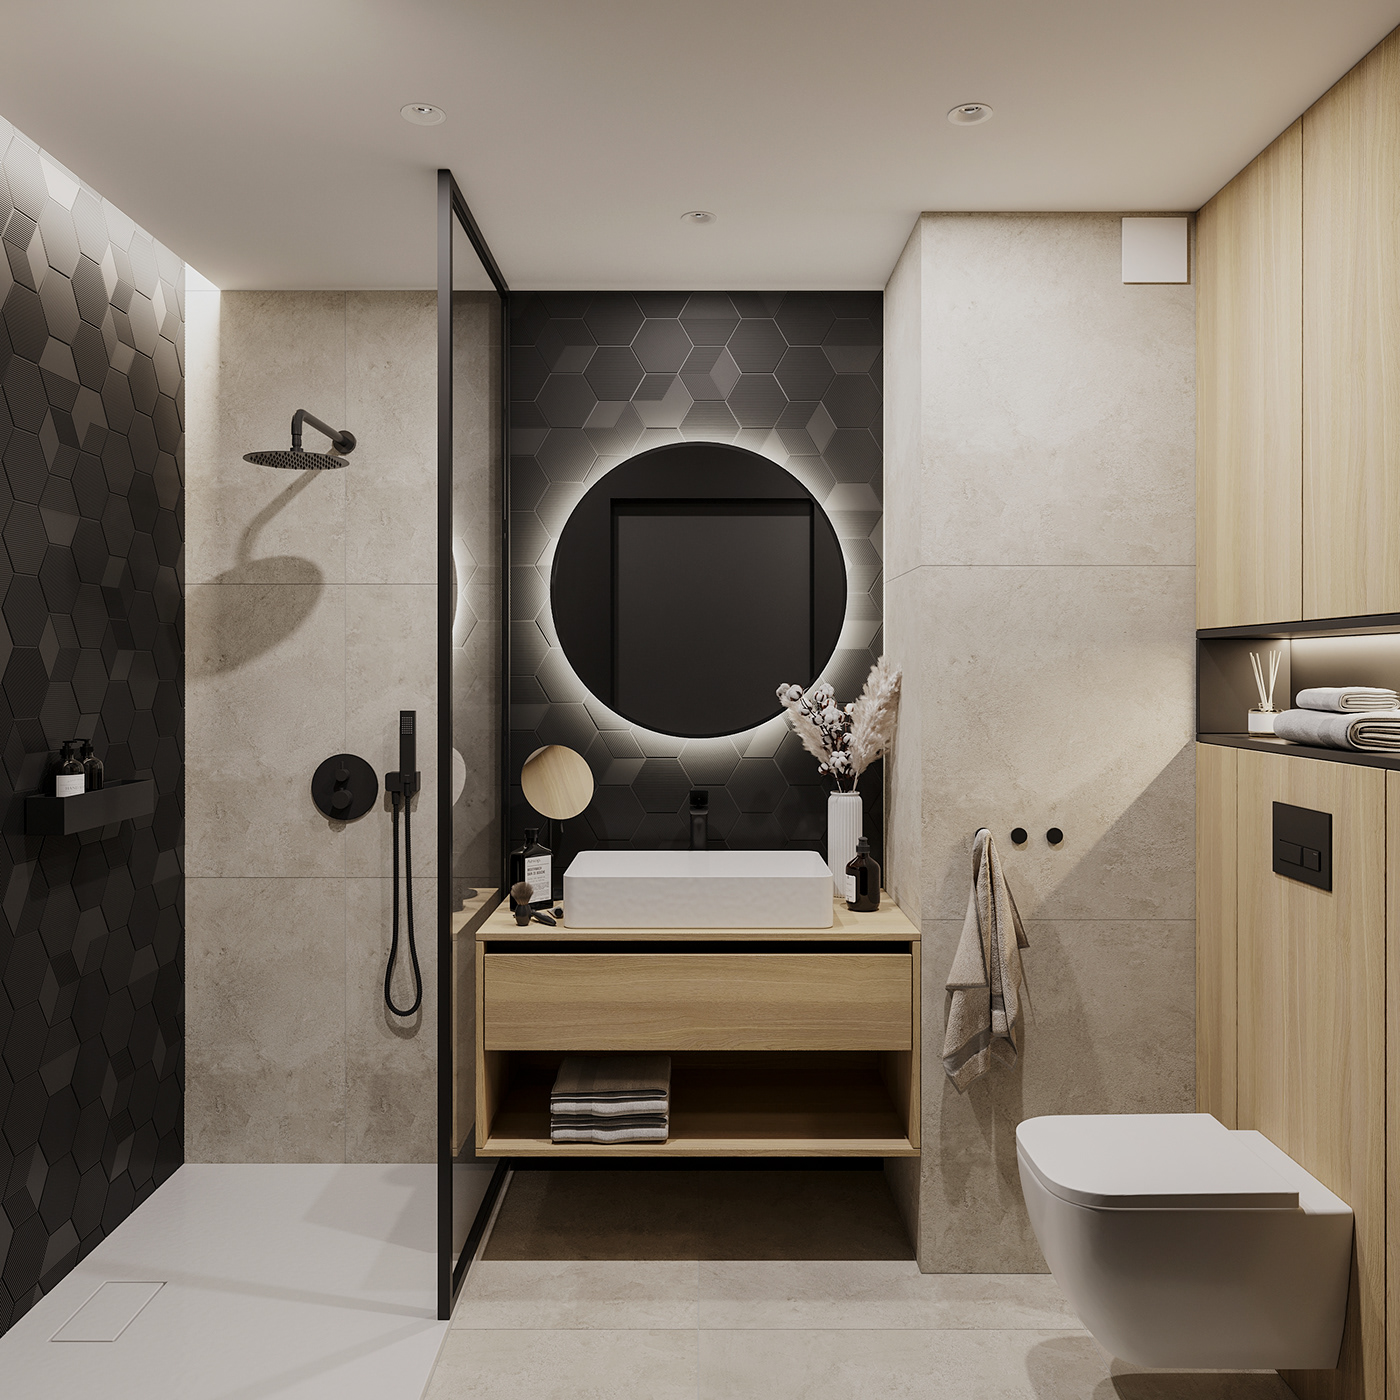 In the bathroom, there is enough space with exquisite design and elegant colors.